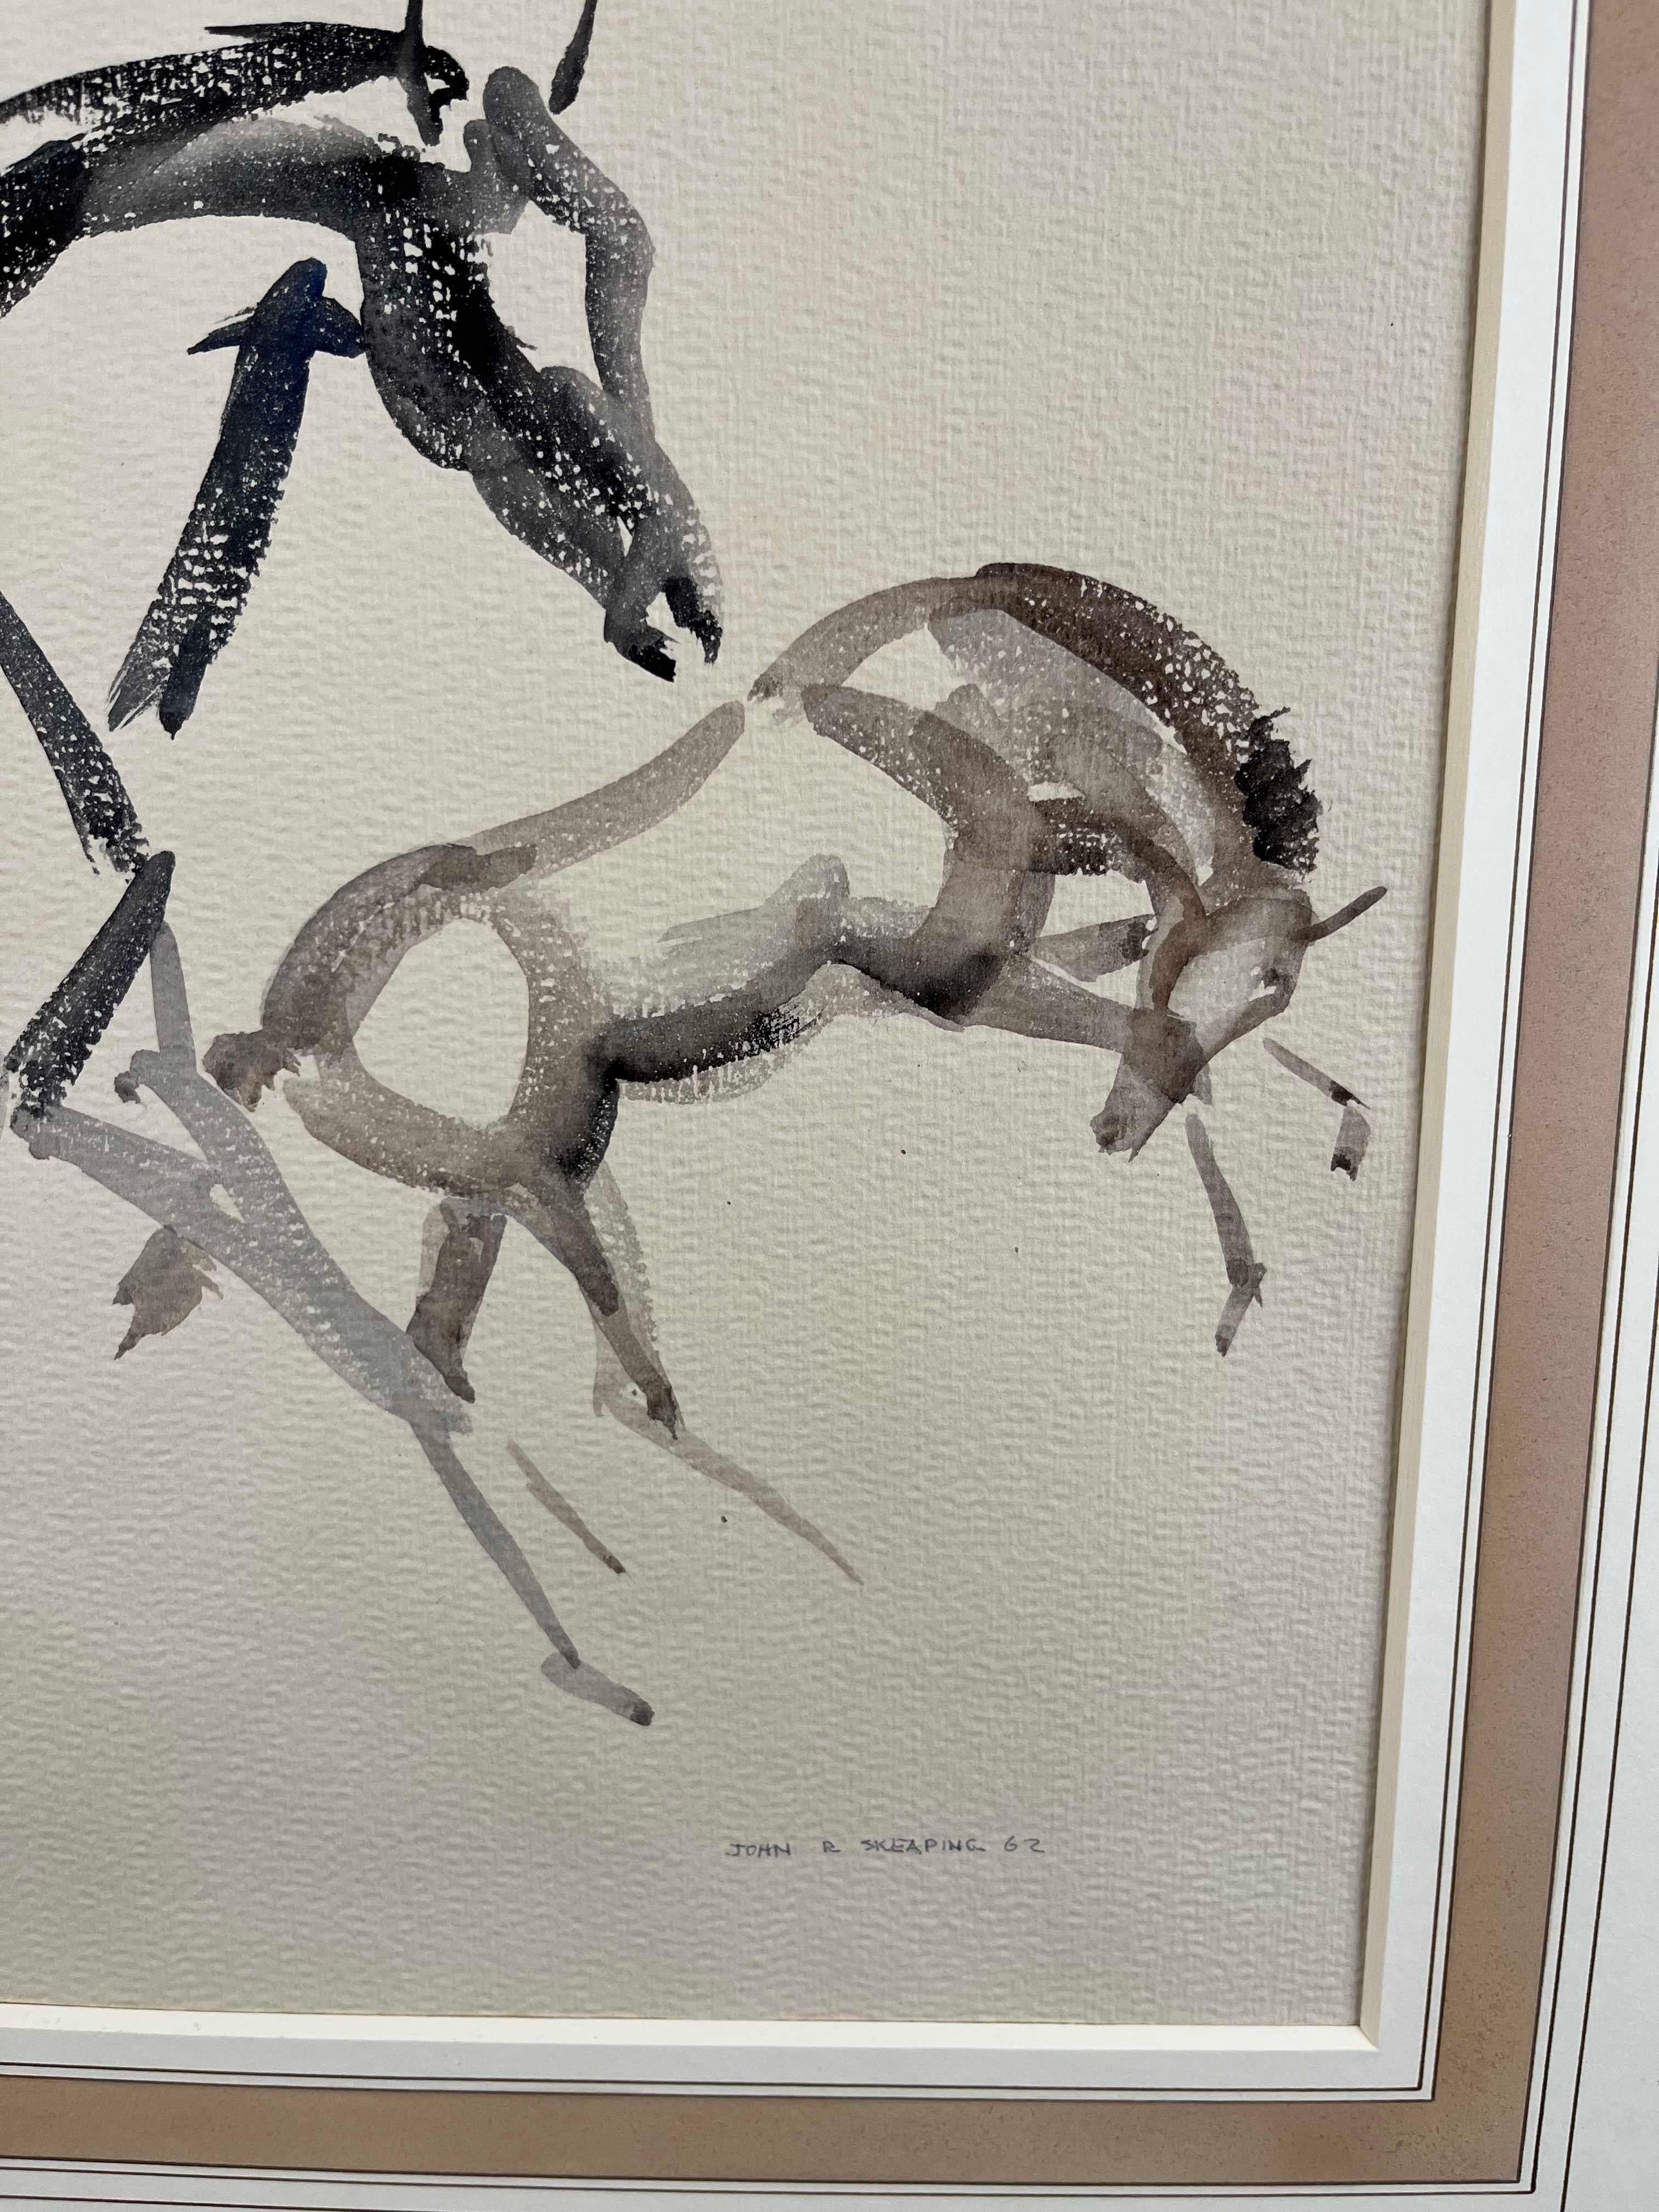 John Rattenbury Skeaping (1901-1980)
Mare and Foal
Singed and dated '62
watercolour and pencil
Drawing - 14  x 19 1/2 in
Framed size - 23 x 28 1/2 in


John Skeaping is regarded as the leading equine sculptor of the twentieth century. He also became